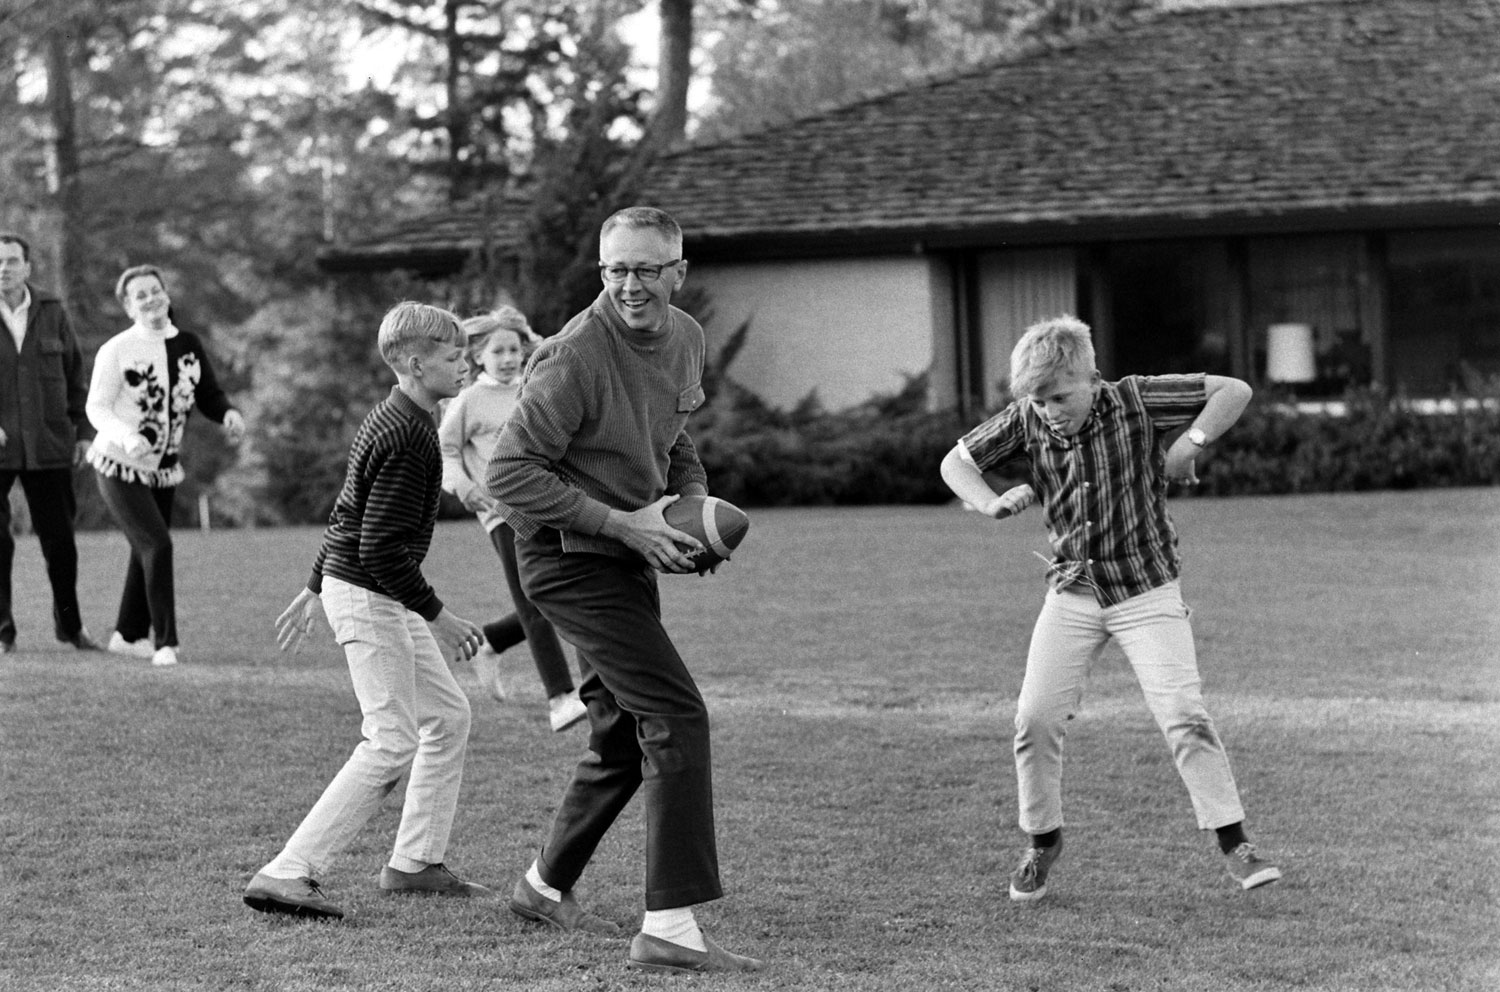 Charles Schulz plays football at his home in California in 1967.